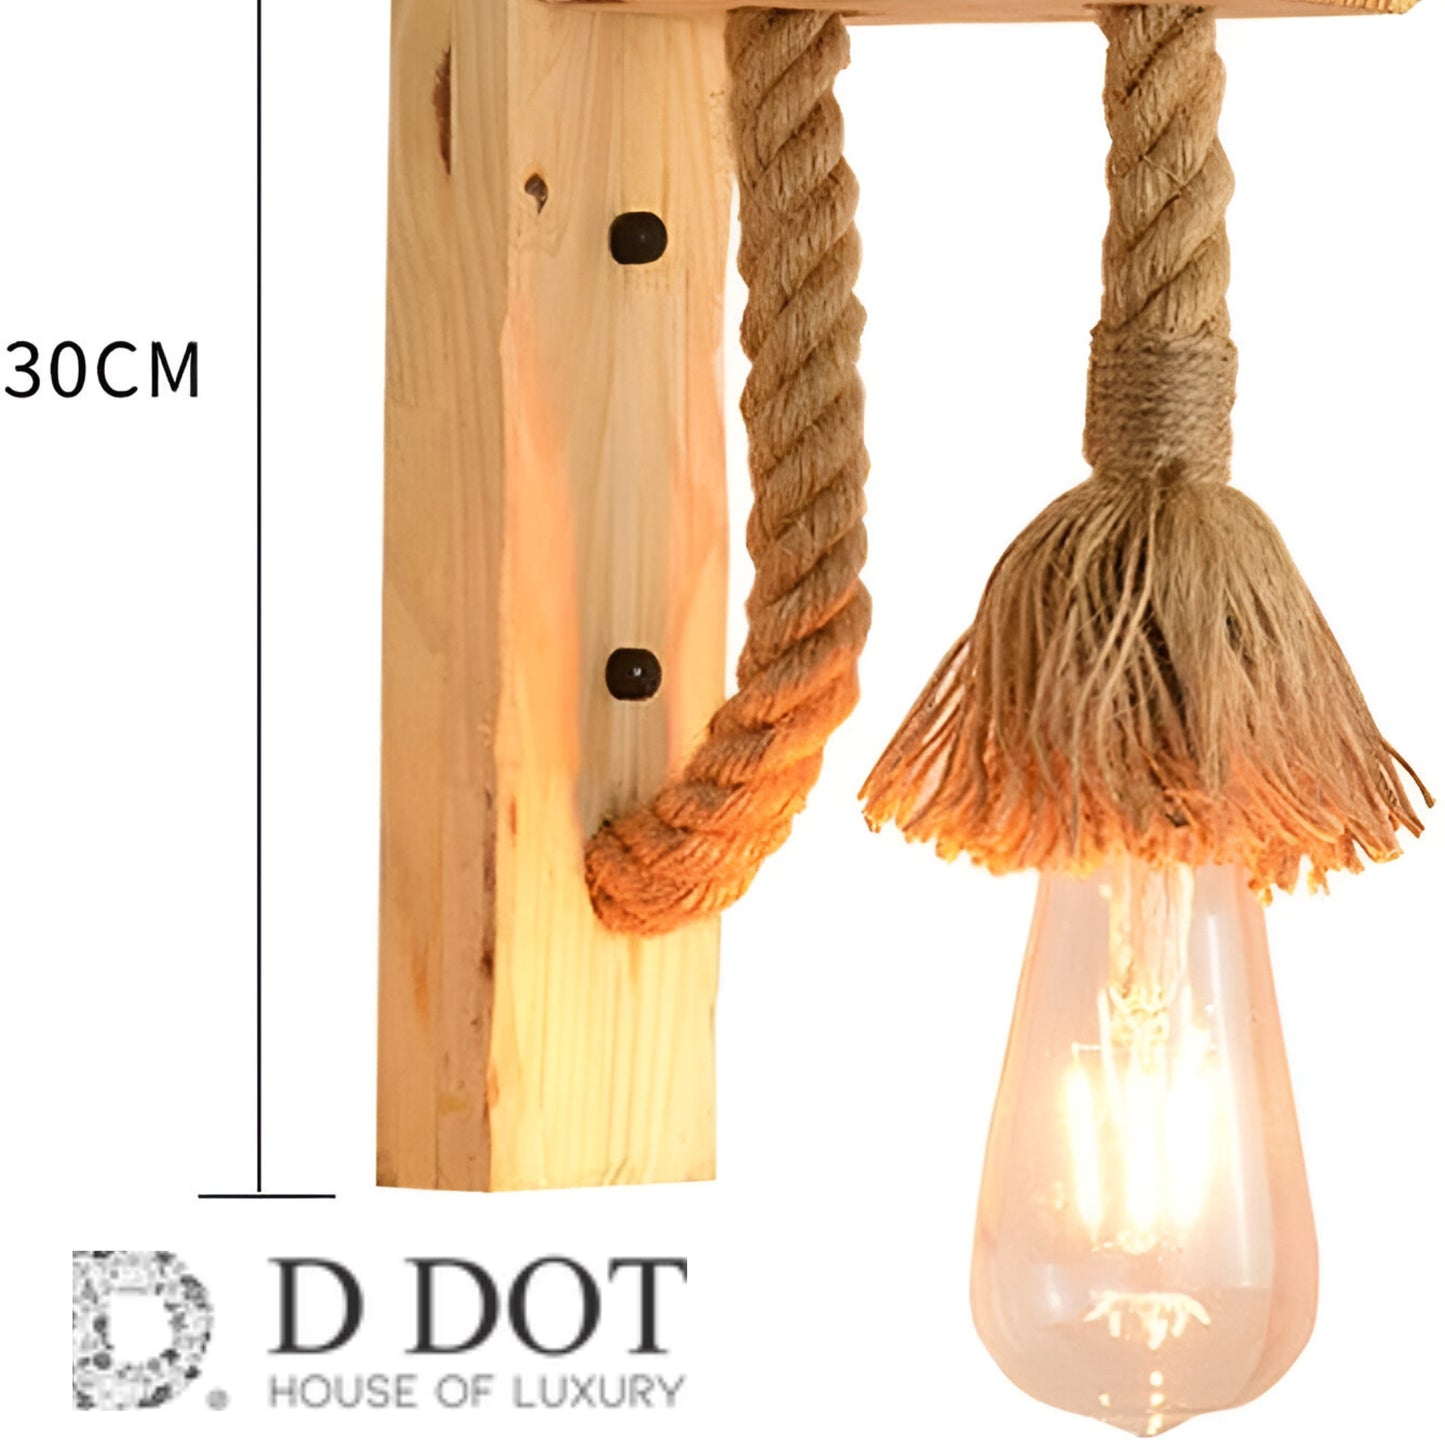 Enhance Your Space with Vintage Industrial Wooden Hemp Rope Wall Lights - Perfect for Indoor & Restaurant Lighting